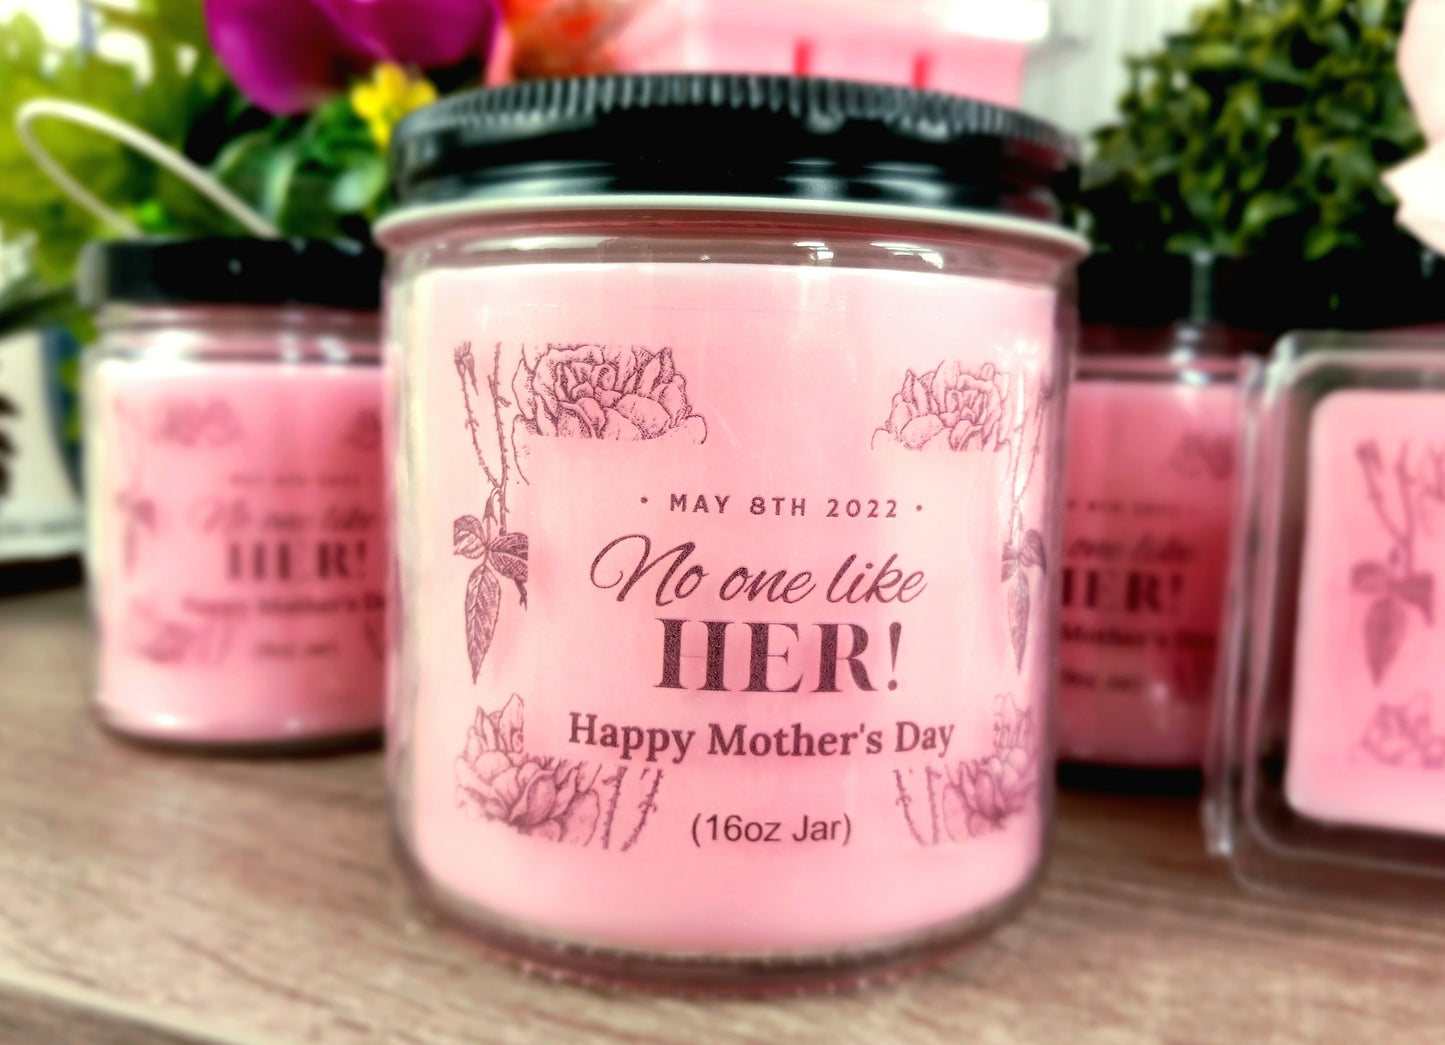 No one like "Her" Candle